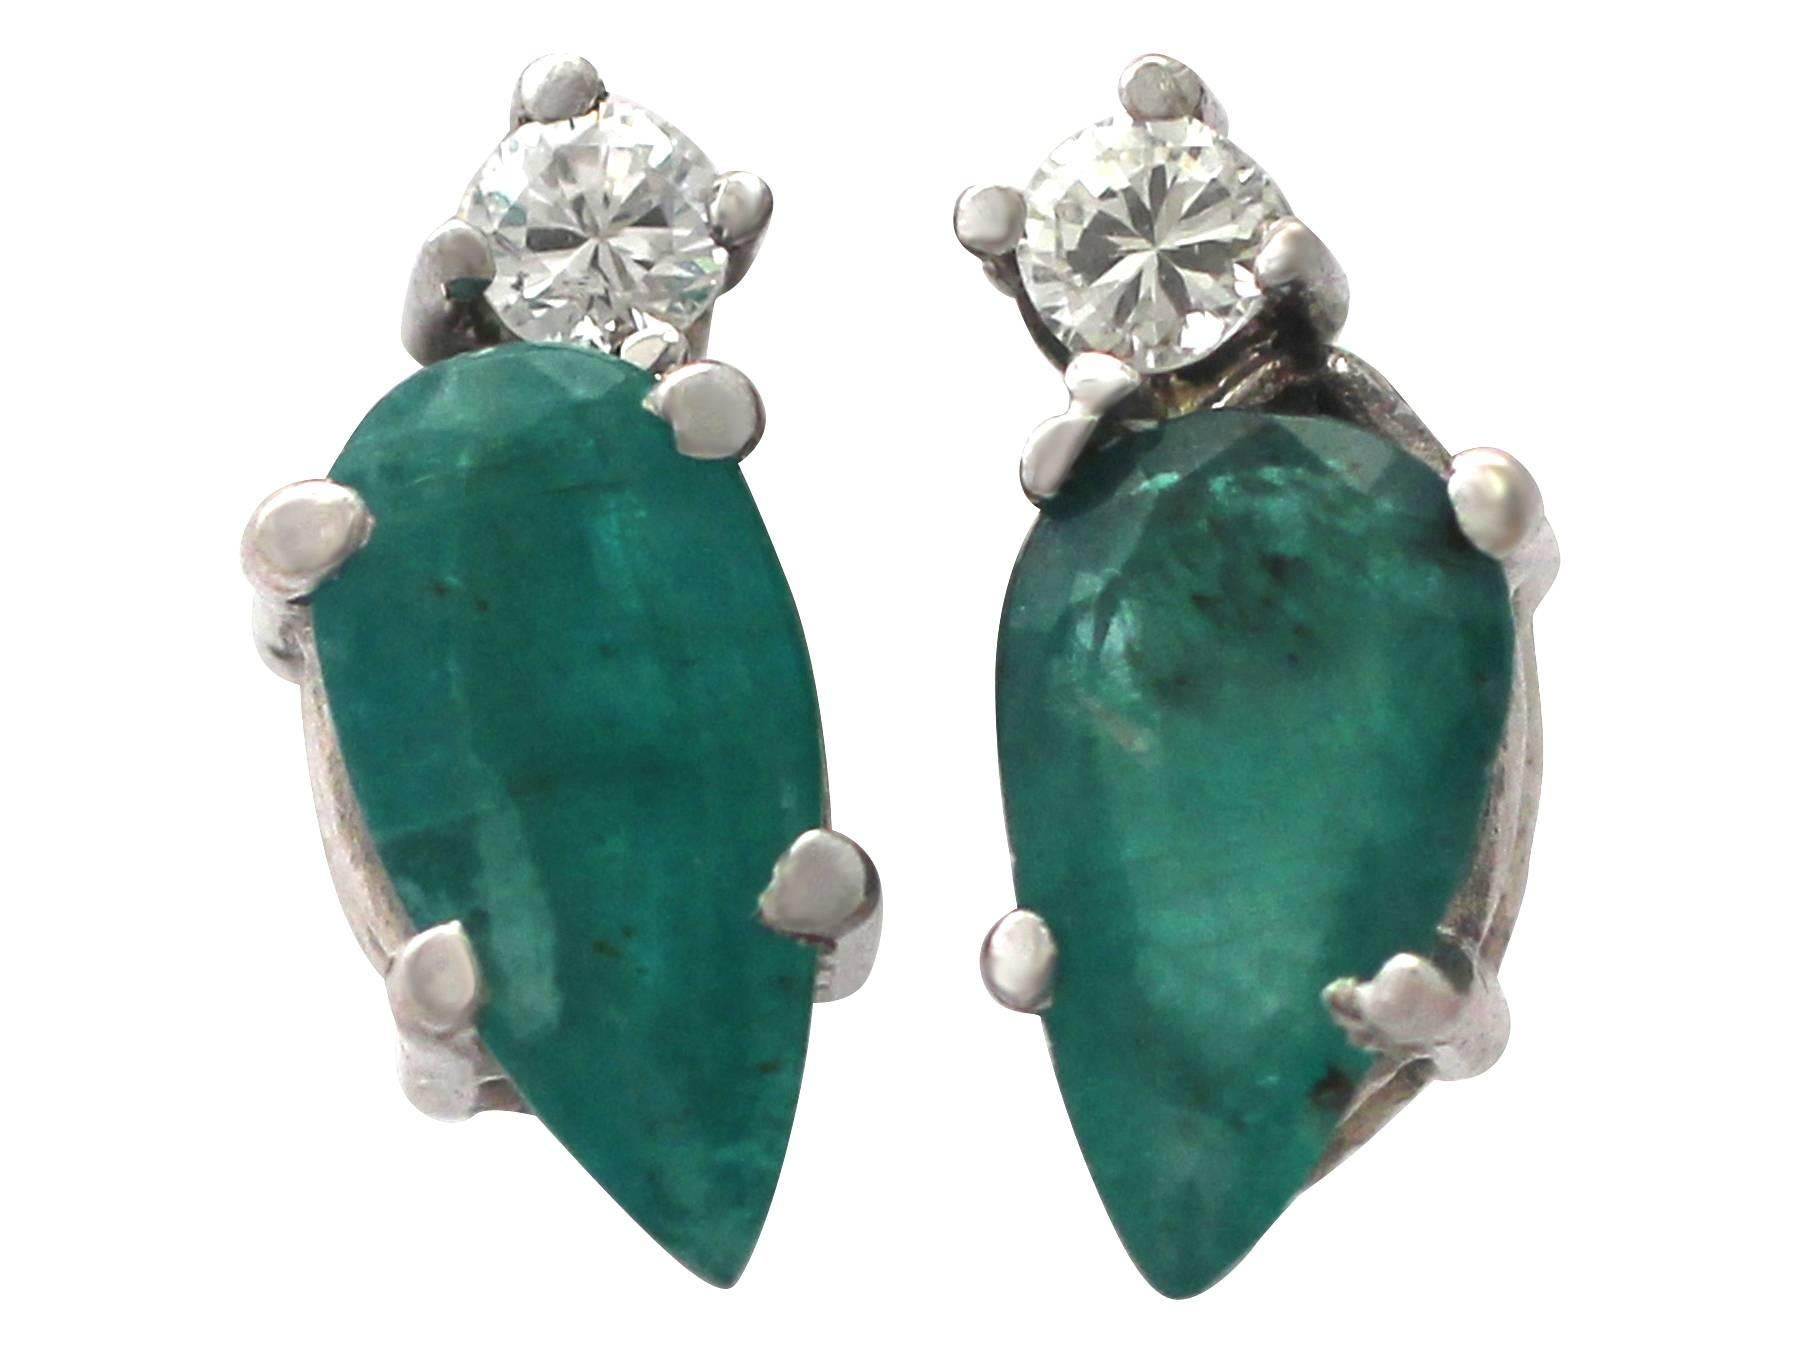 A fine and impressive pair of vintage 1.04 carat natural emerald and 0.05 carat diamond, 18 karat white gold stud earrings; part of our diverse vintage jewelry and estate jewelry collections

These fine and impressive vintage emerald stud earrings